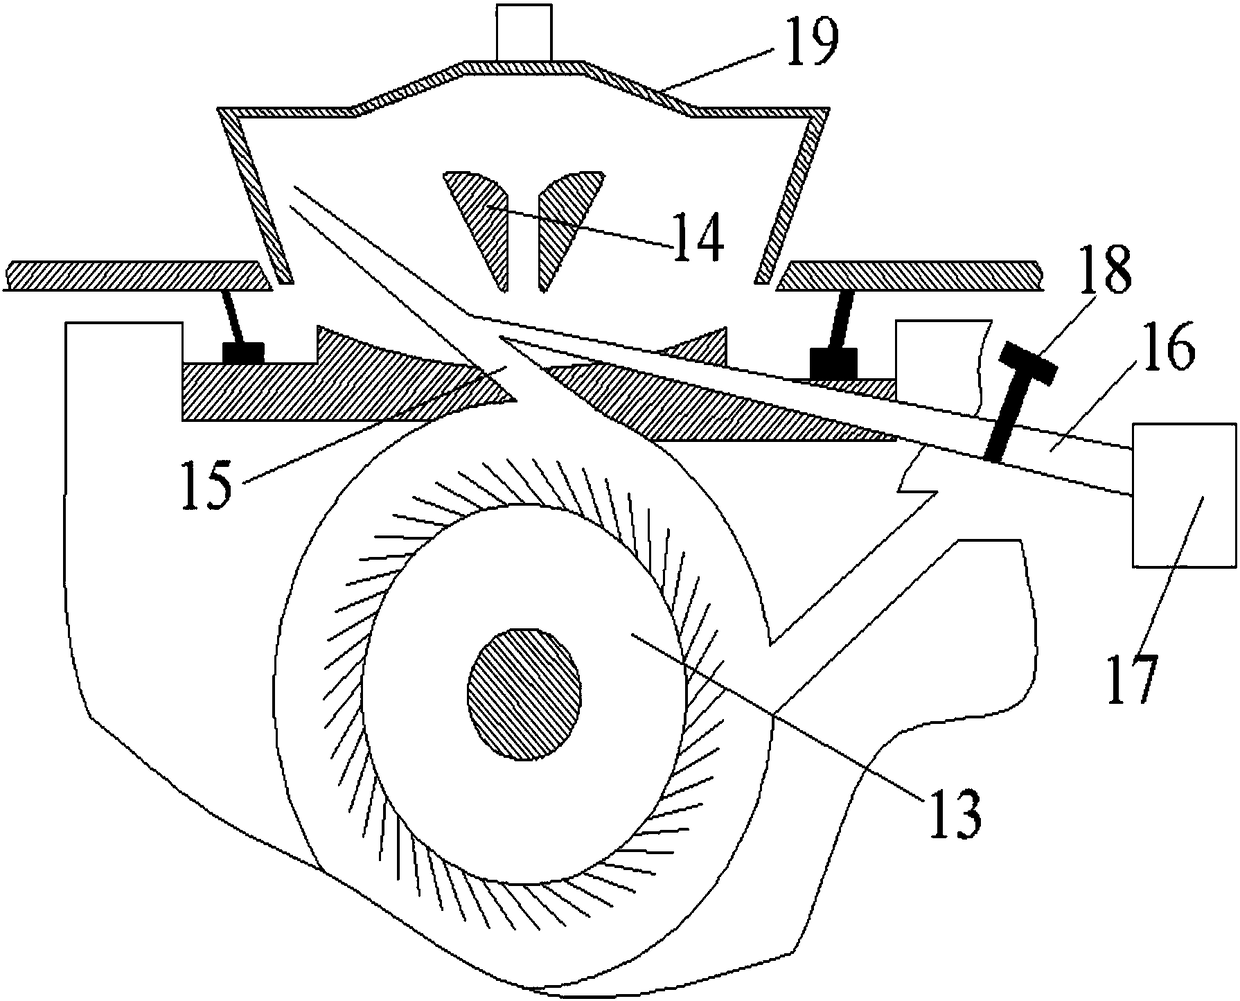 A method for spinning combed noil by rotor spinning